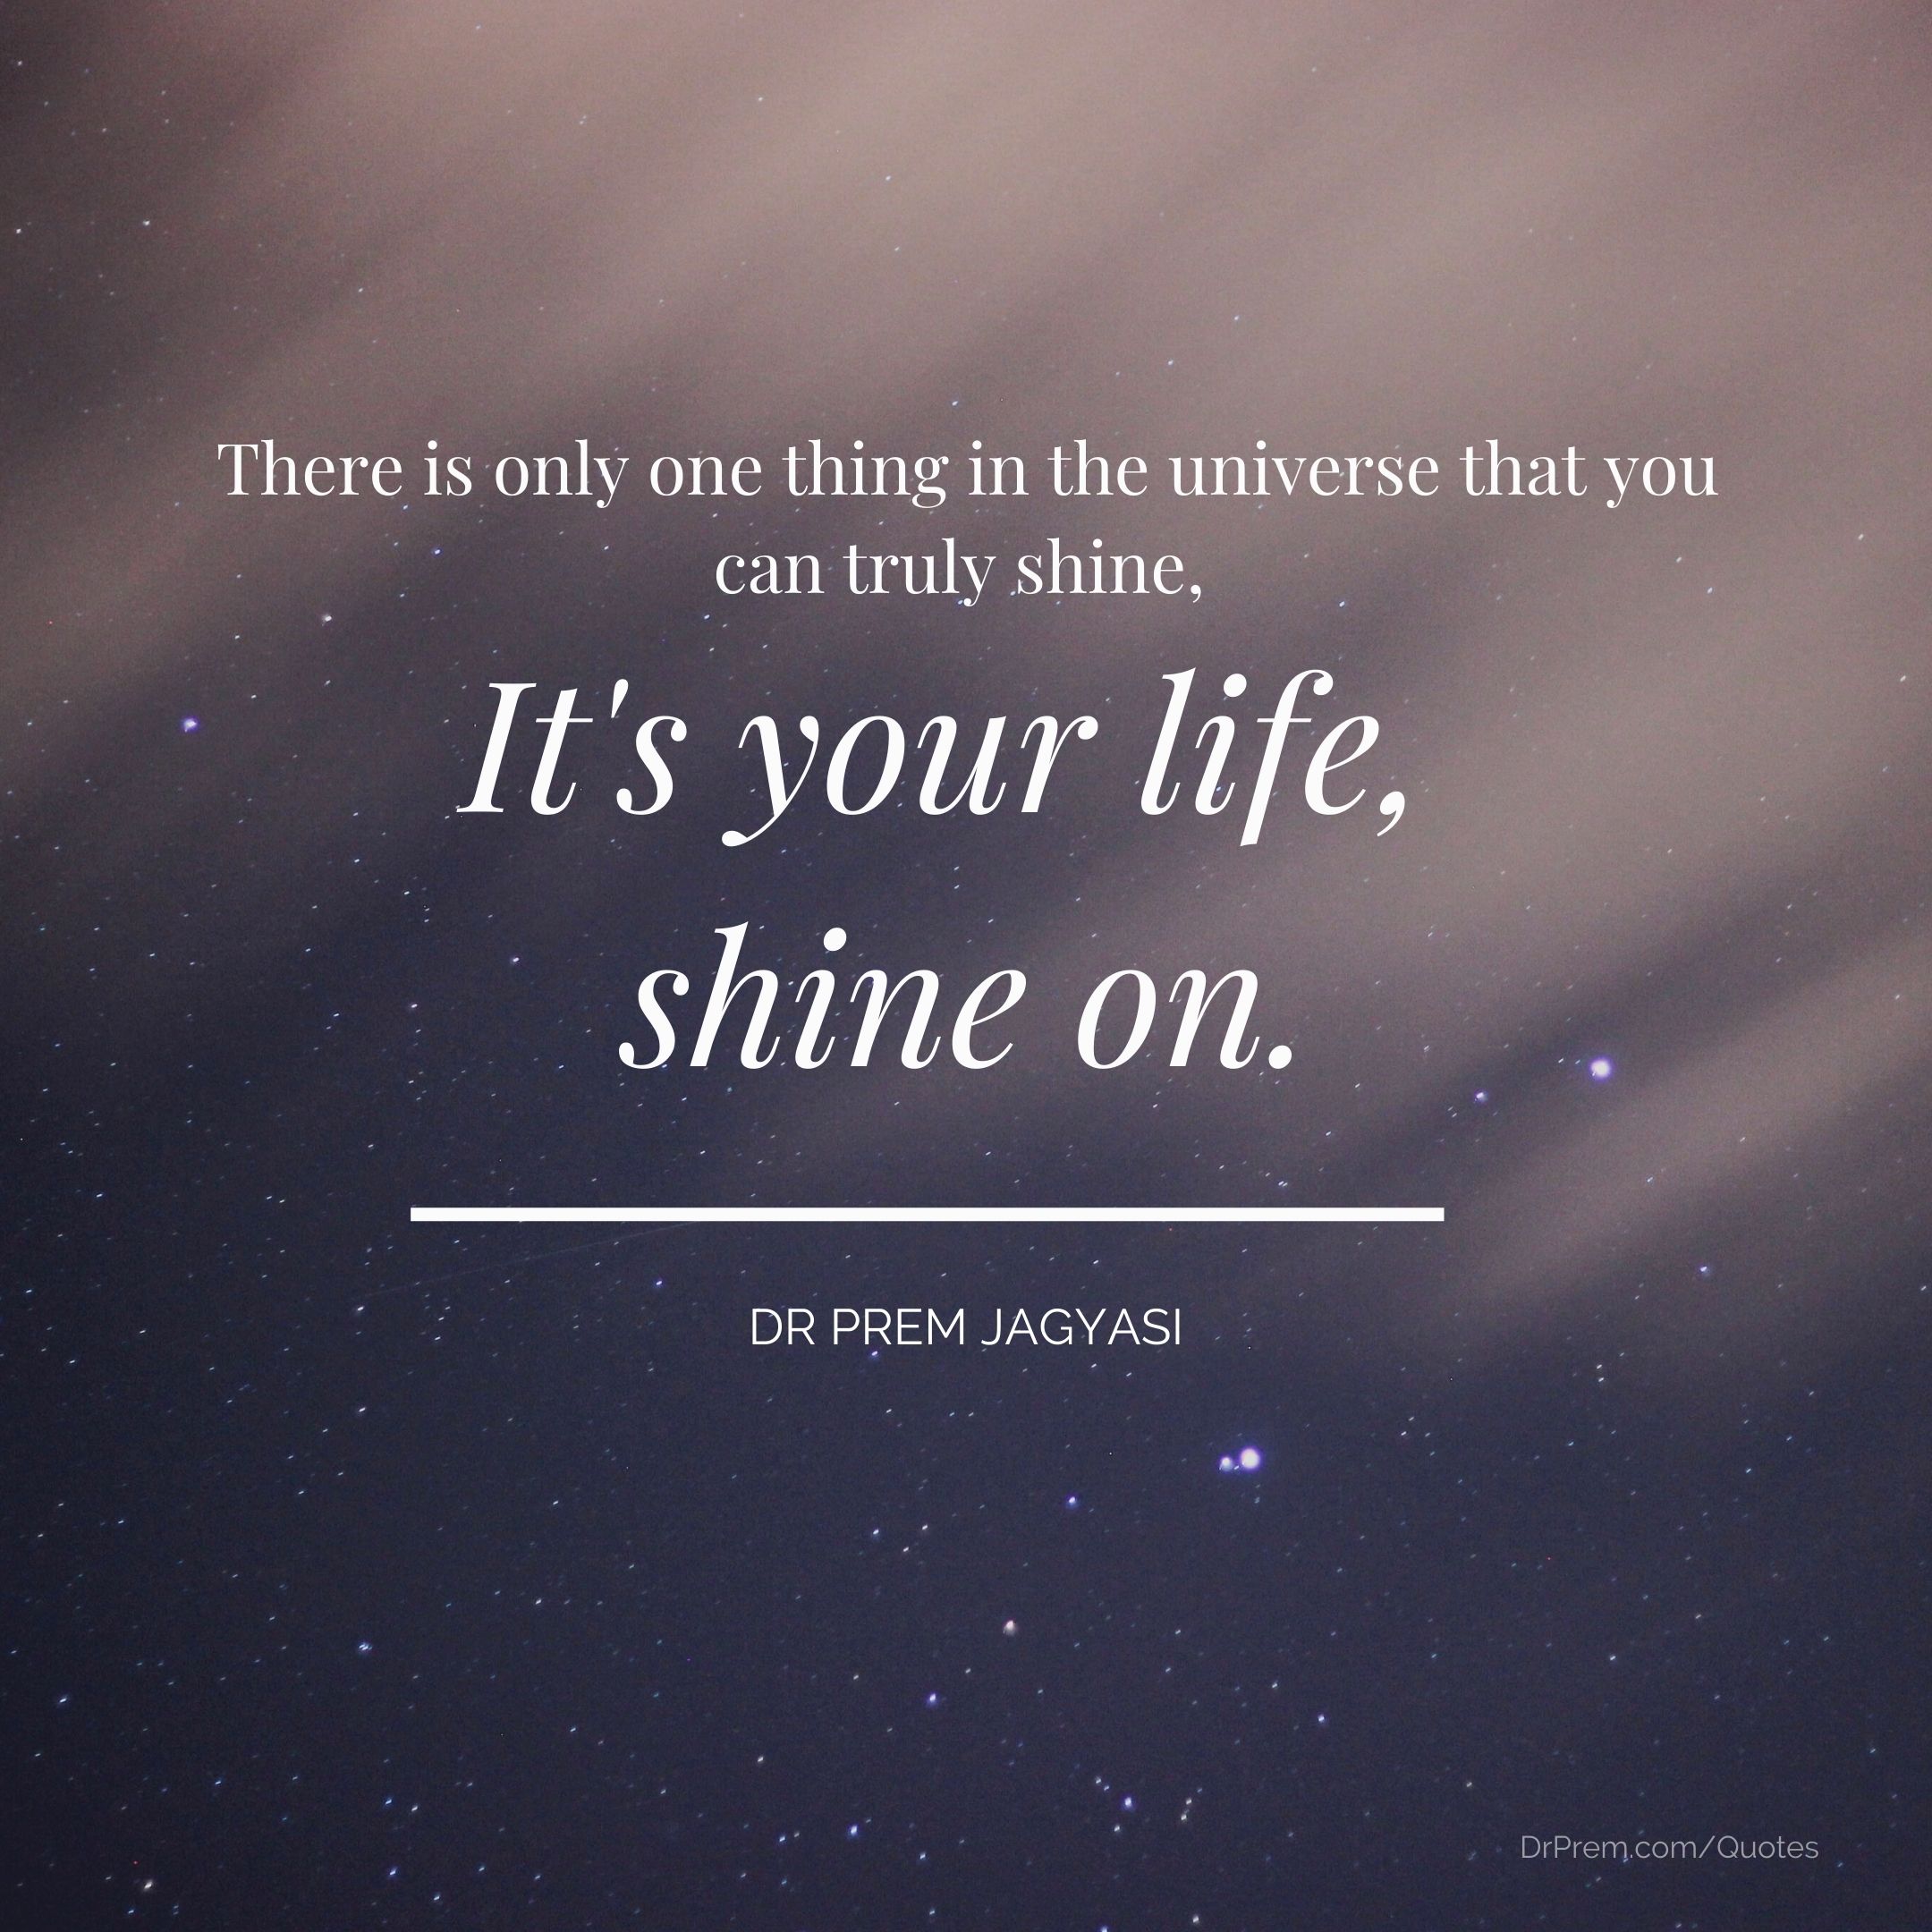 There is only one thing in the universe- Dr Prem Jagyasi Quotes